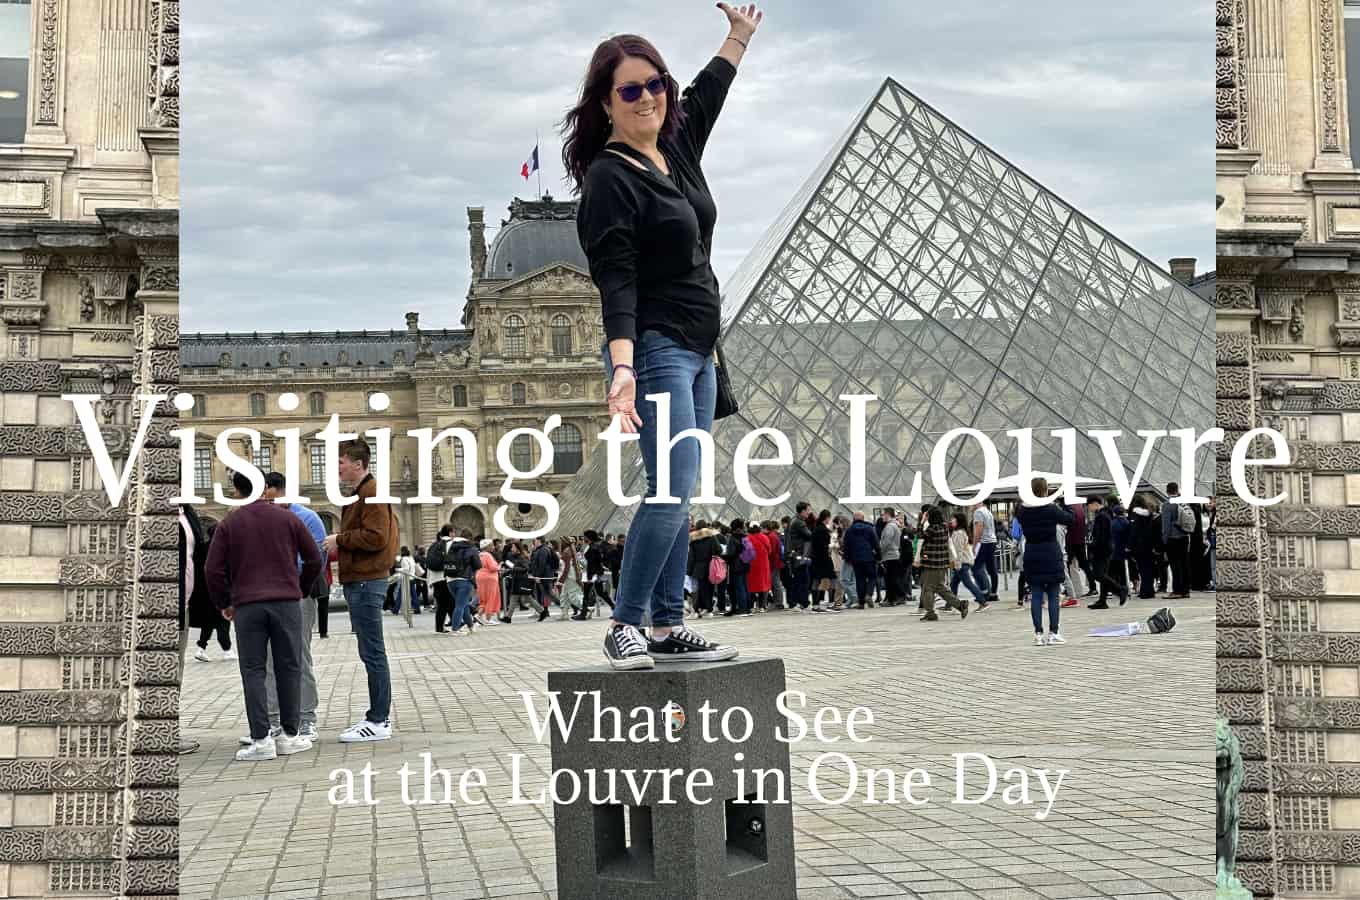 Visiting the Louvre: What to See at the Louvre in One Day